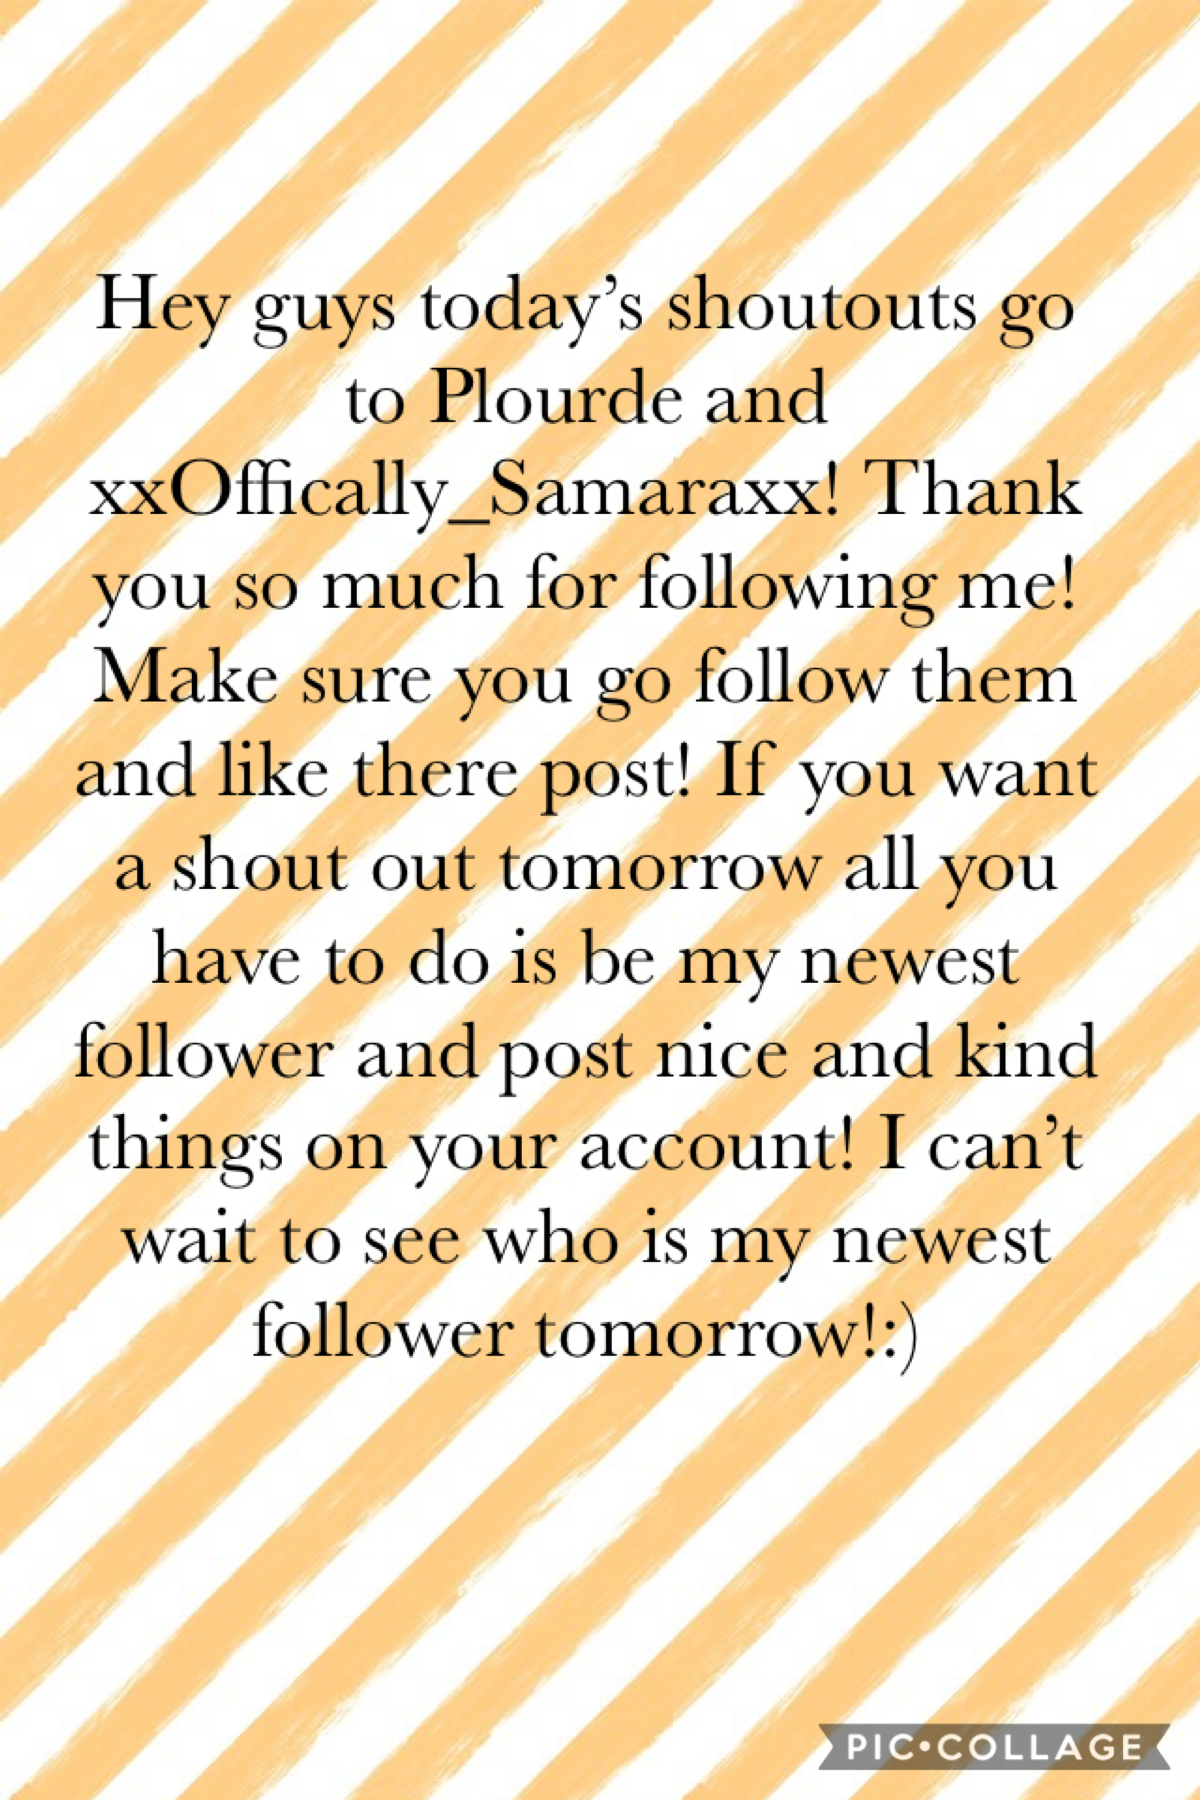 Make sure you are my newest follow tomorrow to get a shout out!:)